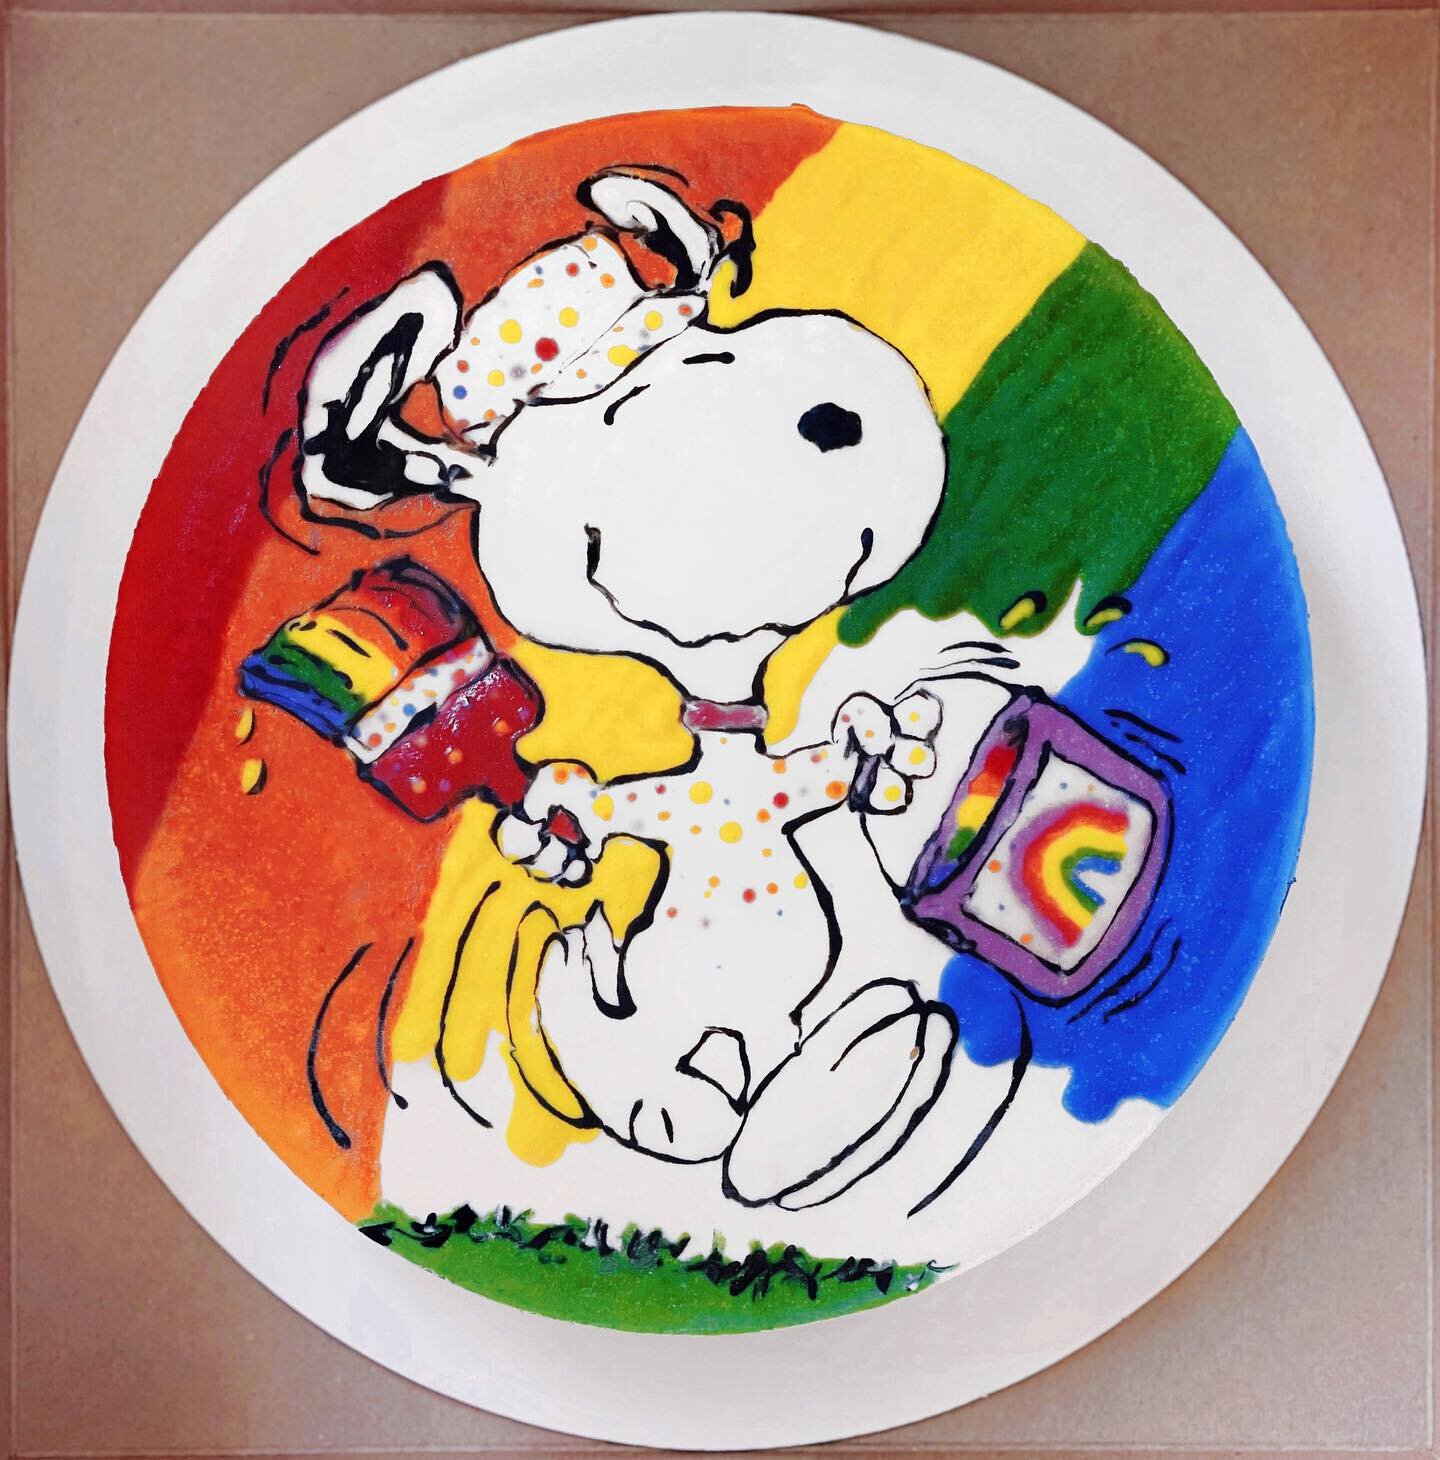 🎂🌈 𝕊𝕟𝕠𝕠𝕡𝕪 🎨🖌
A very special 8&rdquo; Lemon Ginger Cayenne cheesecake for our pal @heypaulfrank!

This might be our favorite Snoopy cake yet! All of the colors used come from organic fruits and herbs:
🔴 Dragonfruit
🟠 Goji Berries
🟡 Turmer